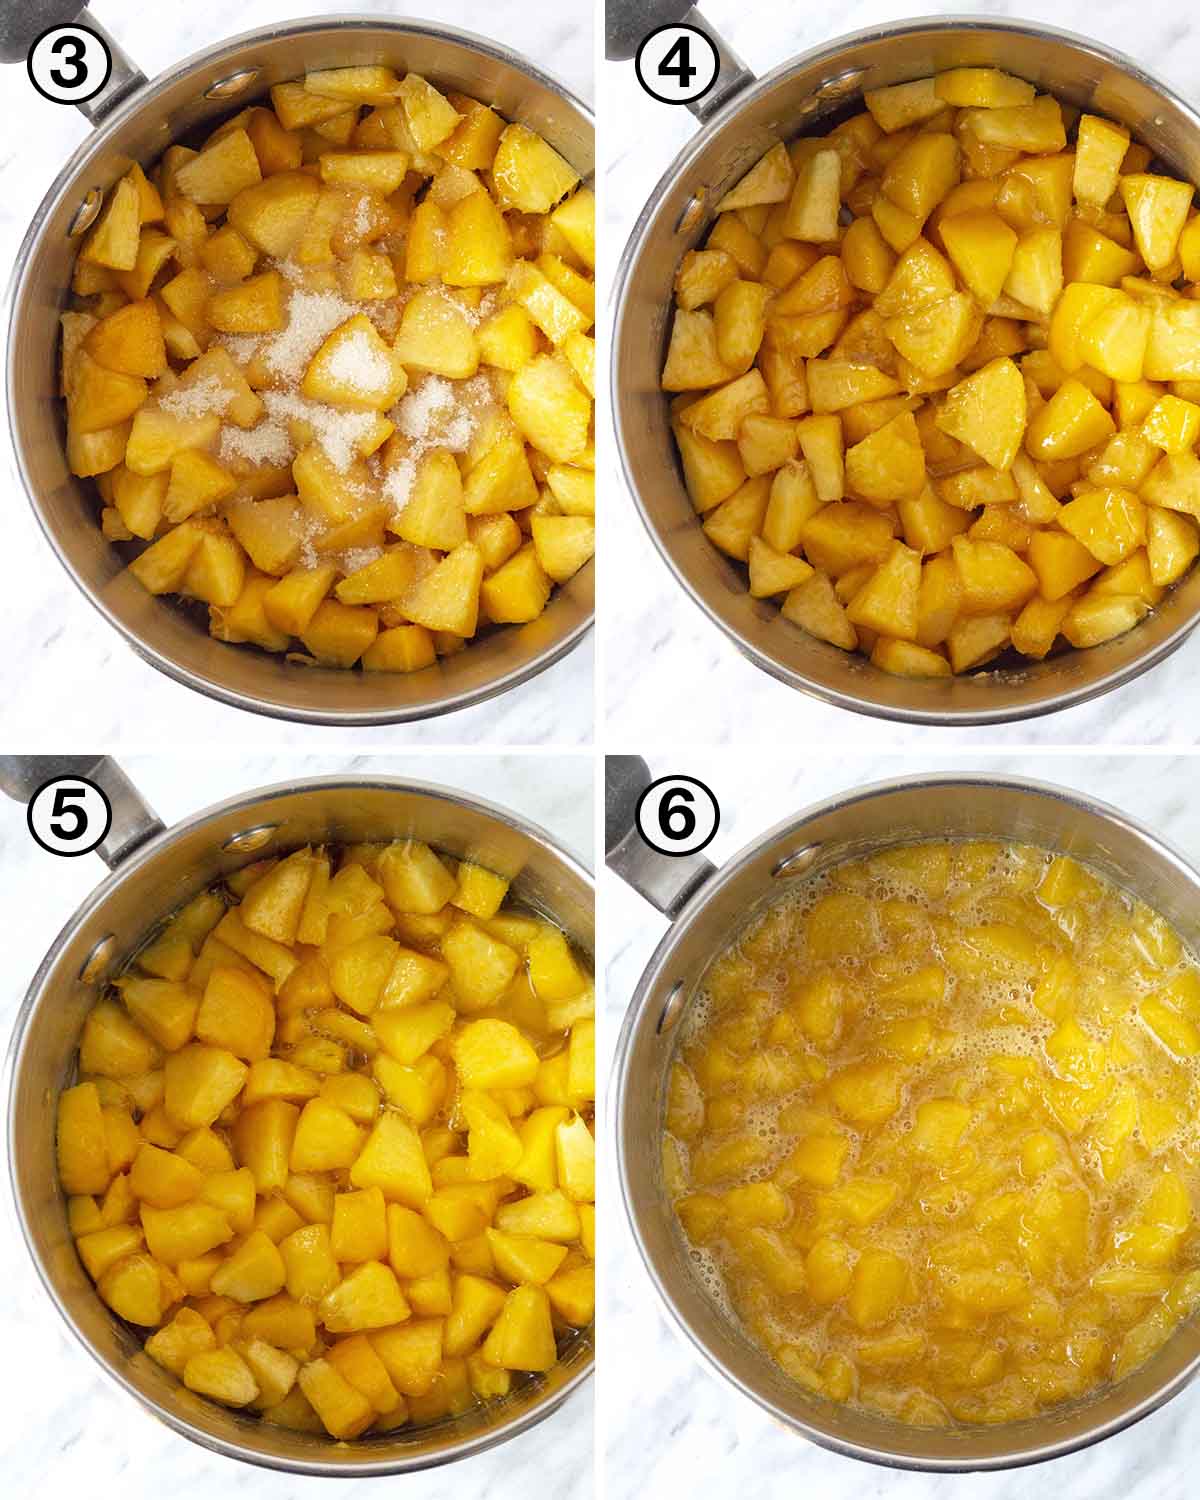 A collage of four images showing the second set of steps needed to make peach sauce.